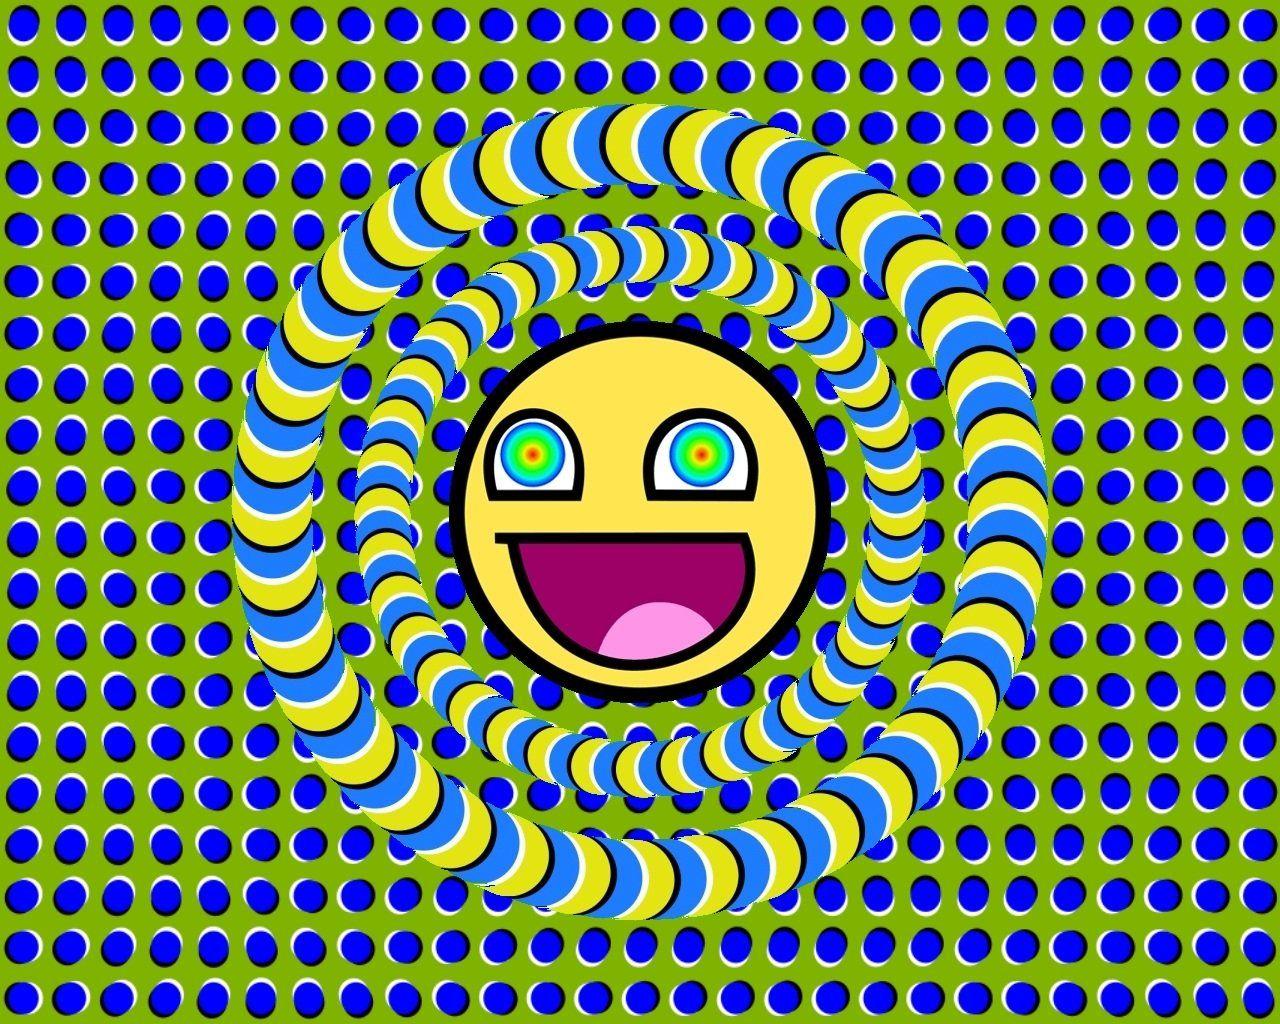 Psychedelic Awesome Smiley Wallpaper 1280x1024